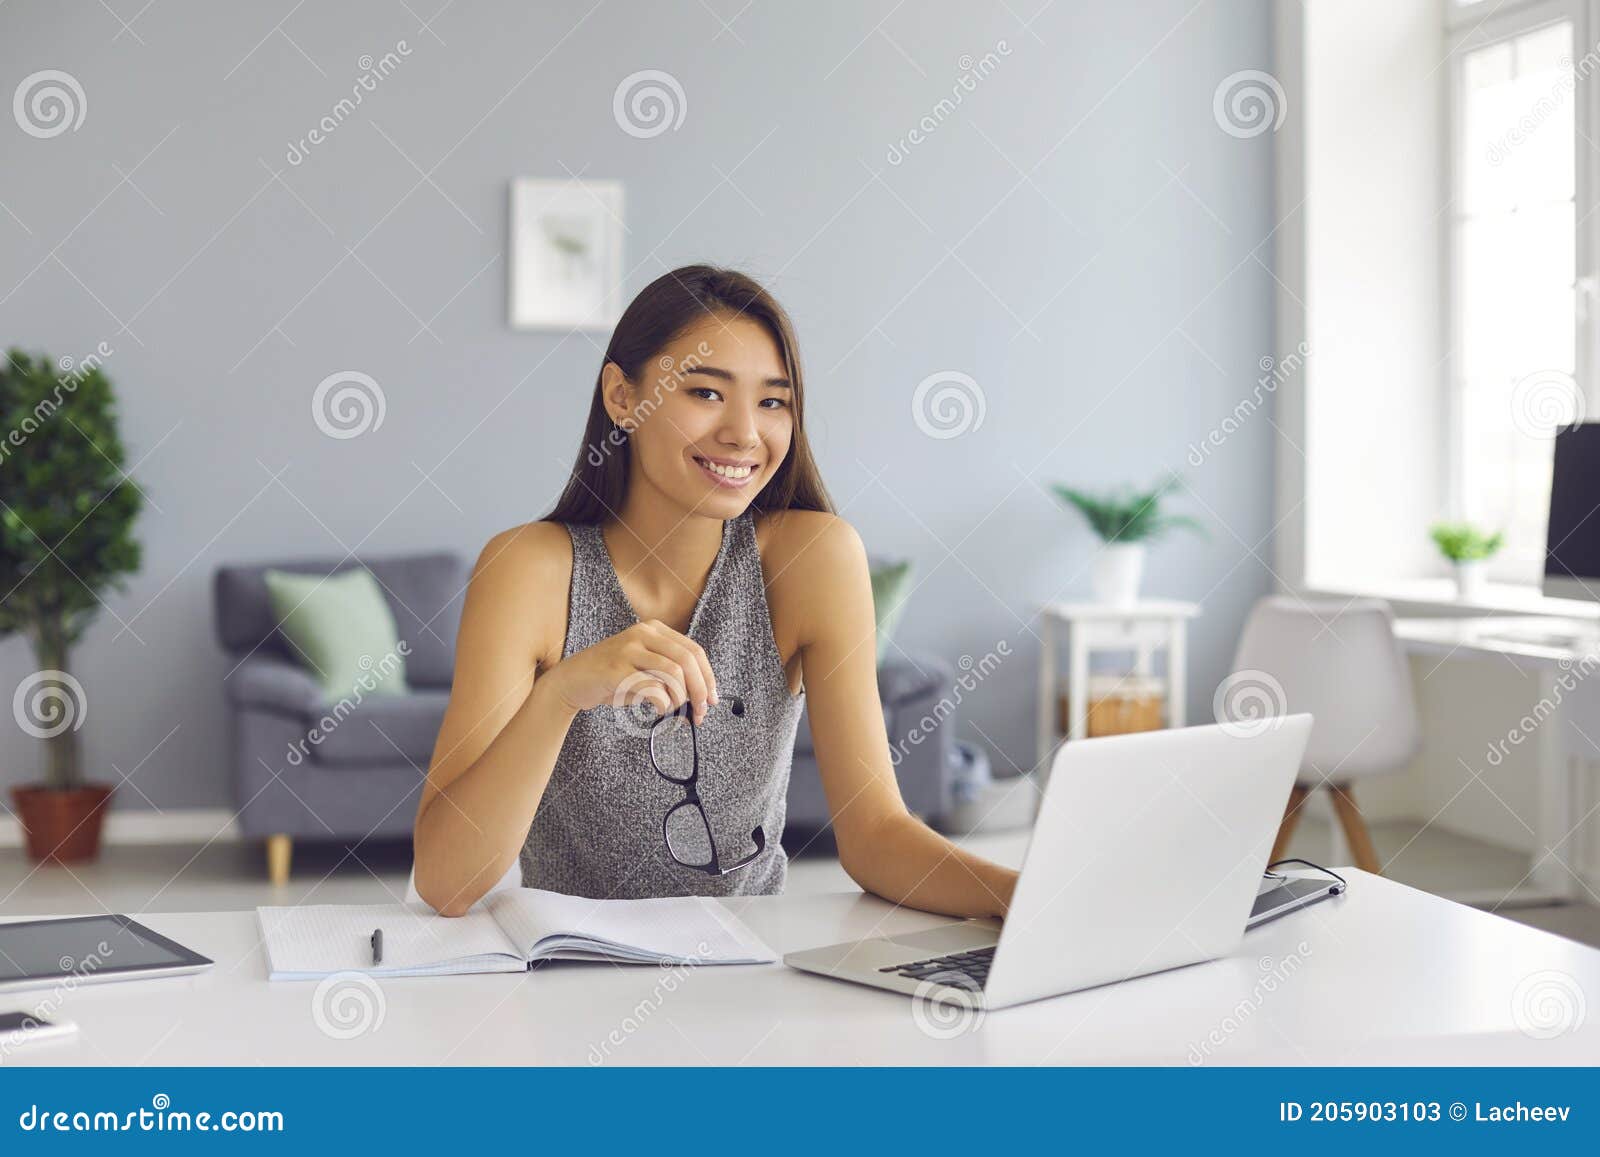 Smiling Asian Woman Office Worker Working in Modern Spacious Office ...